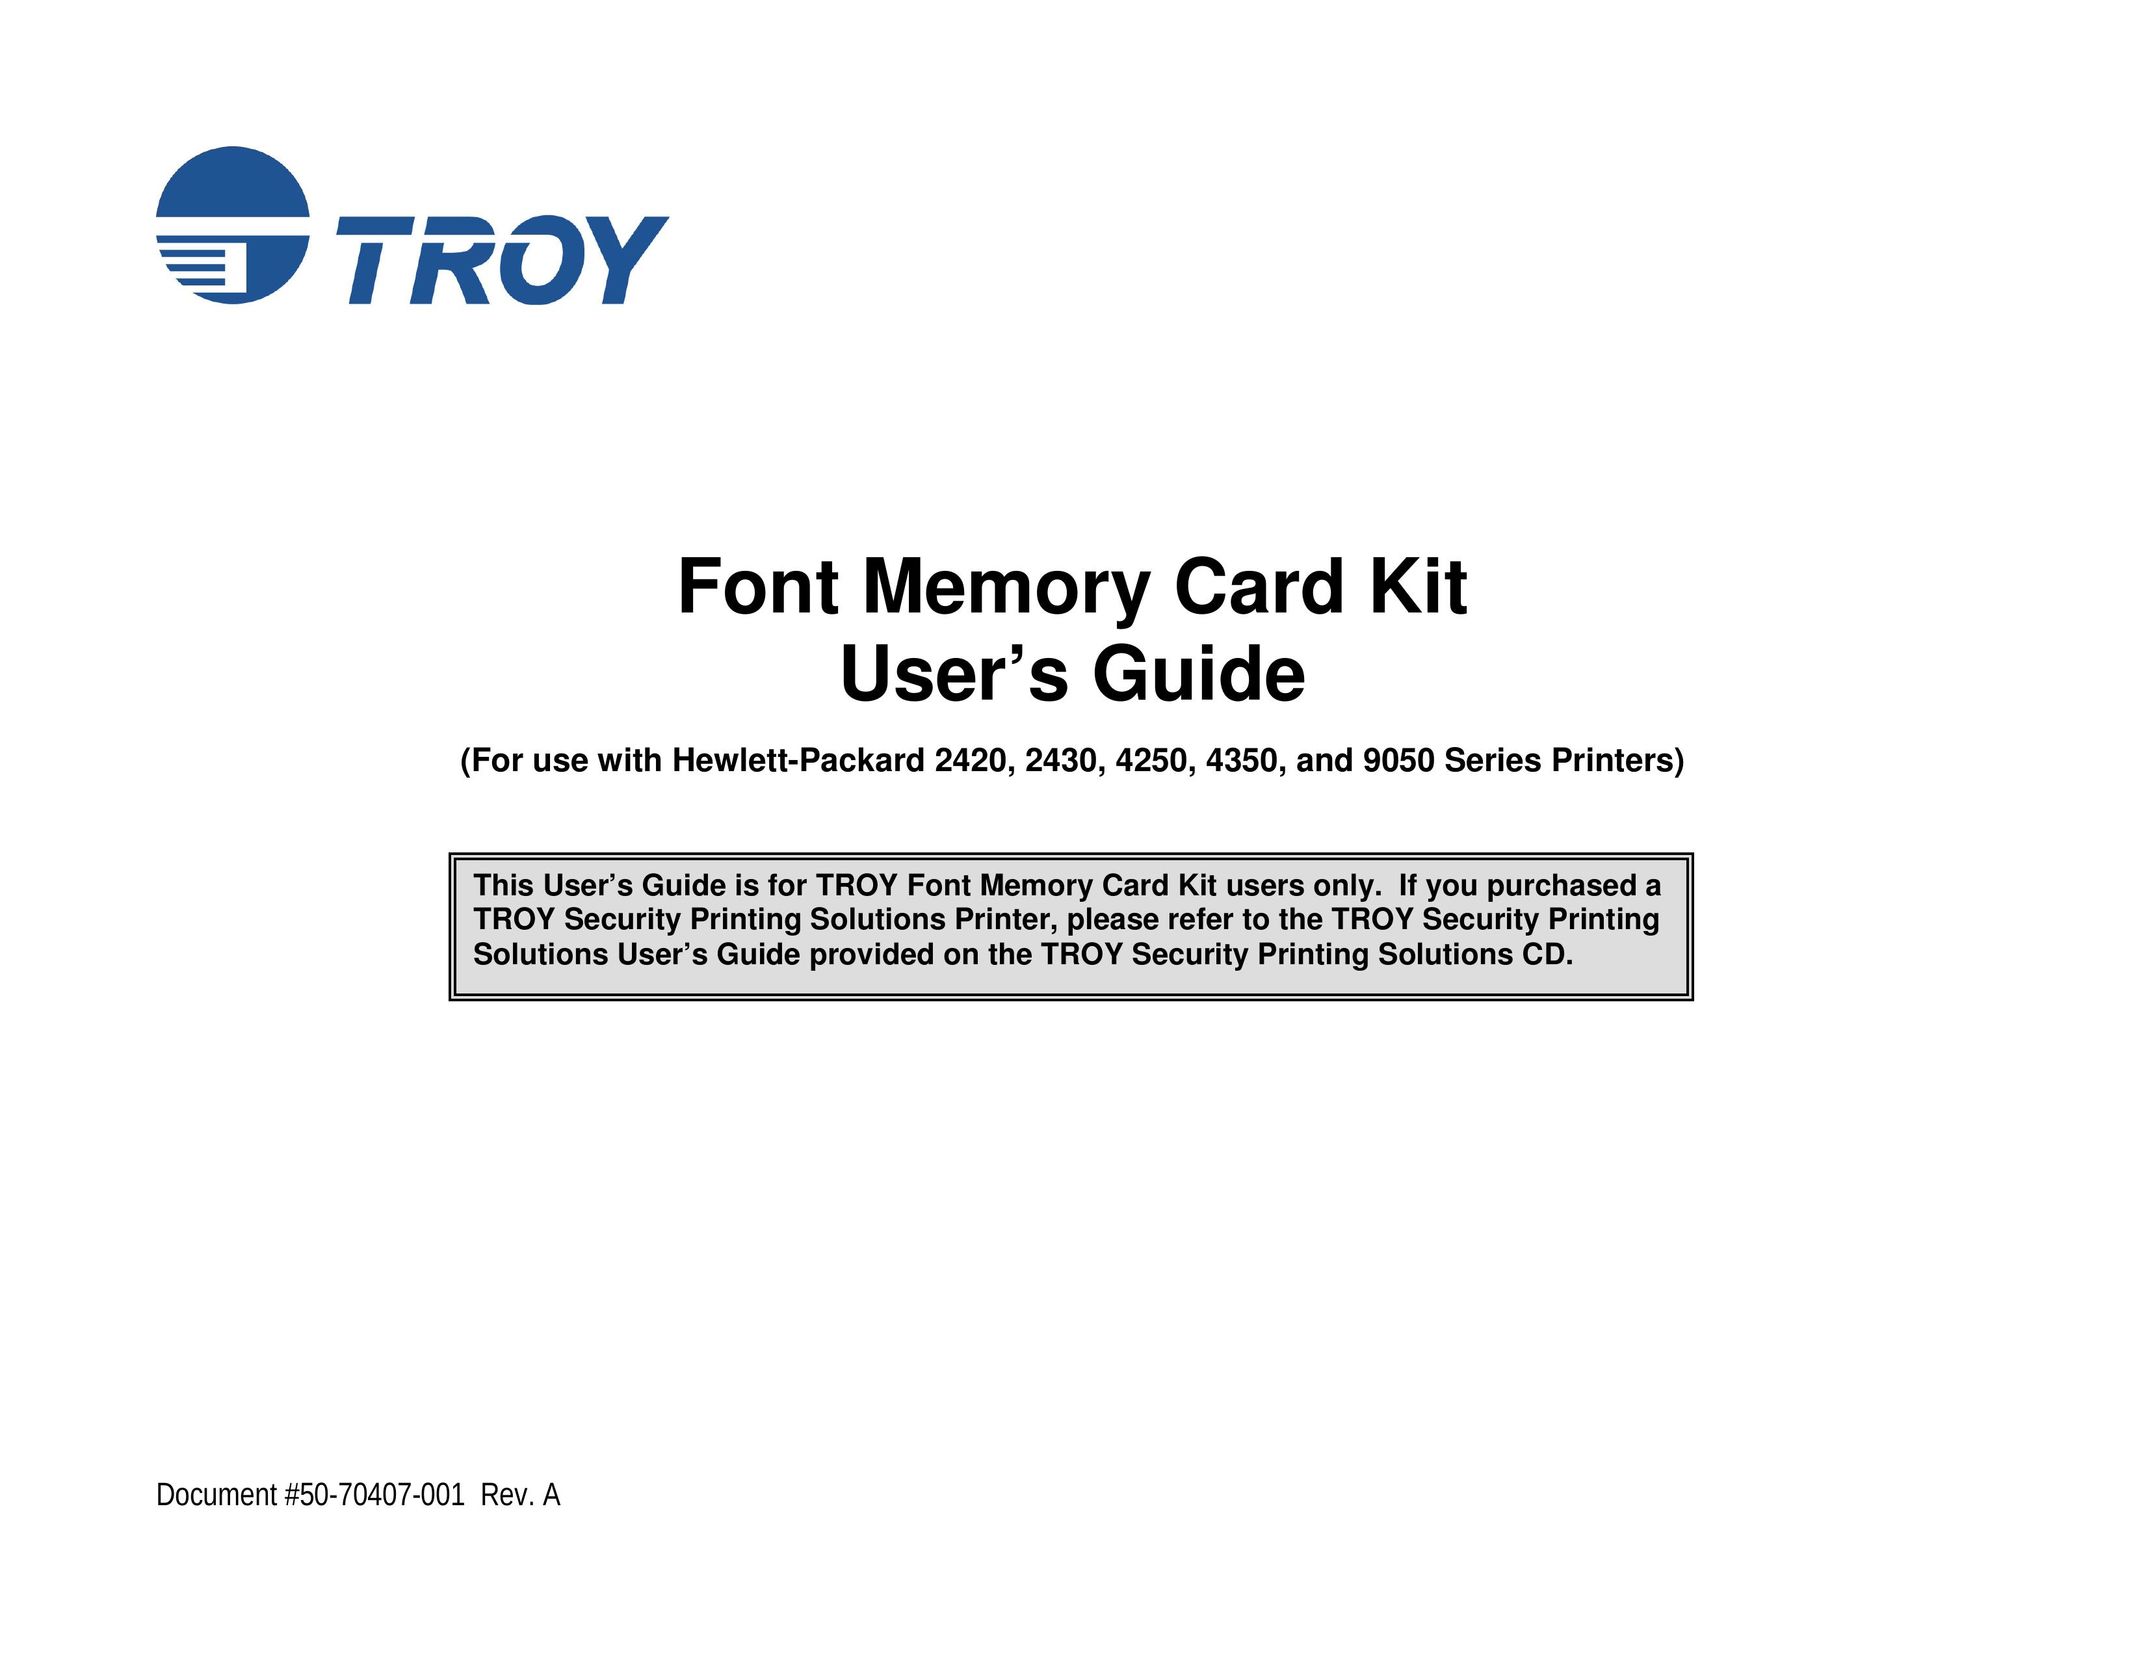 TROY Group Font Memory Card Kit Computer Drive User Manual